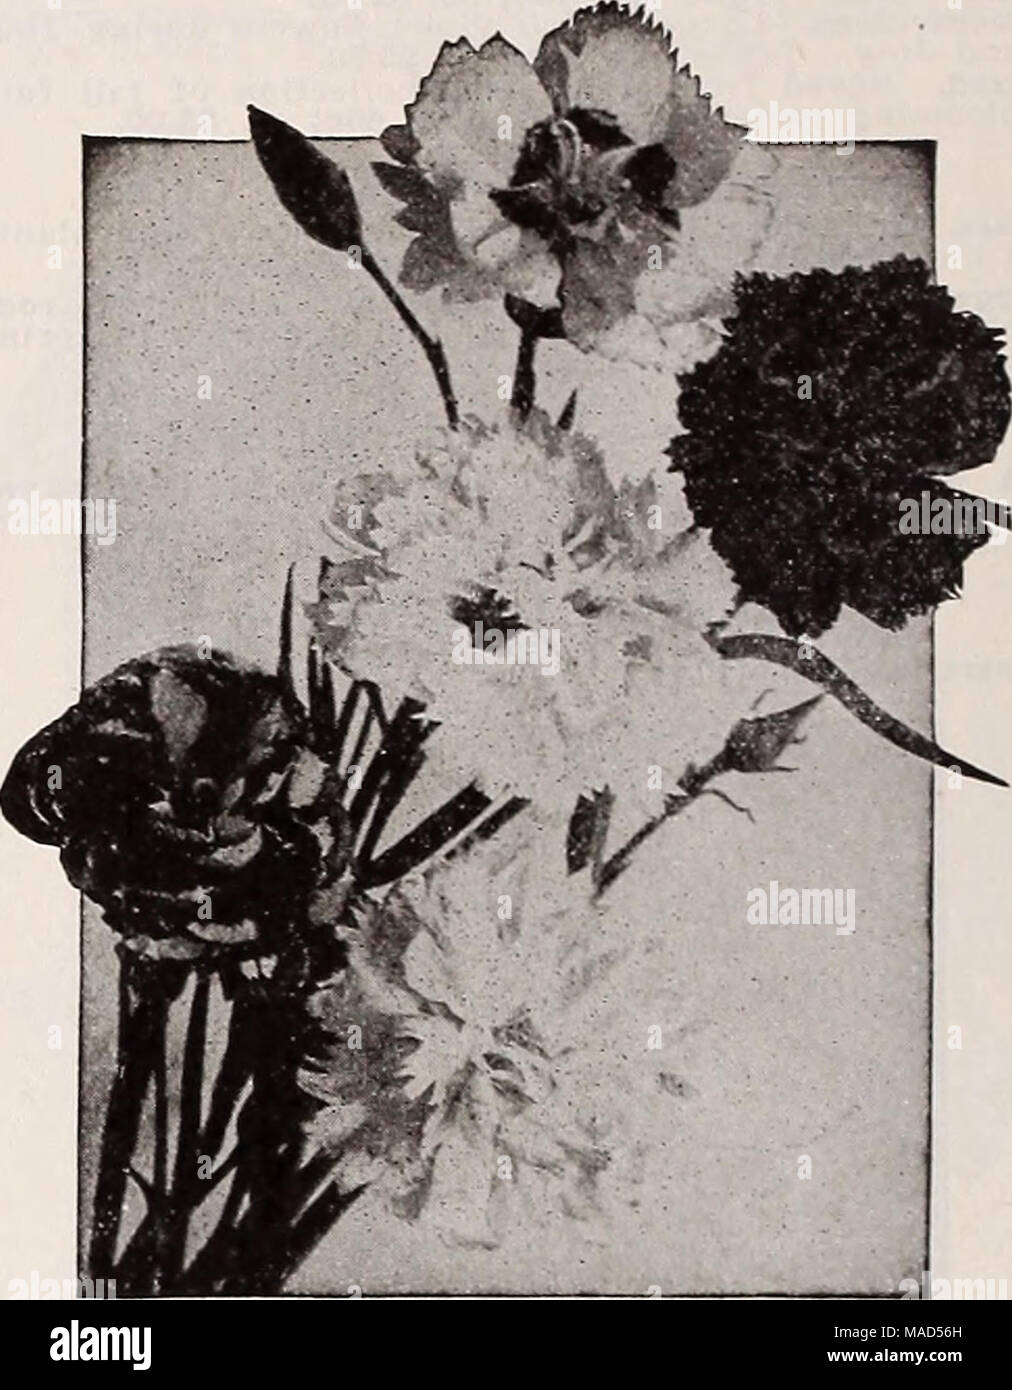 . Dreer's wholesale catalog for florists : winter - spring - summer 1938 . Dianthus plumarius. Double Mixed Dianthus—Hardy Pinks Allwoodl alpinus. Blooms flrst year from seed. Singh and double fragrant flowers in all colors of Dianthus. 4 to 6 inches. Tr. pkt. 50c; oz. $3.00. Tr. pkt. Oz. Caeslus (Cheddar Pink). A dwarf tufted variety. Rose-pink flowers $0 25 40 $1 25 2 00 Deltoides albus. Showy white flowers.. —Brilliant. Dwarf, brilliant carmine blooms Granlticus. Very low-growing, forming a dense carpet covered in May and June with crimson flowers; 4 inches. A splendid variety for the rock  Stock Photo